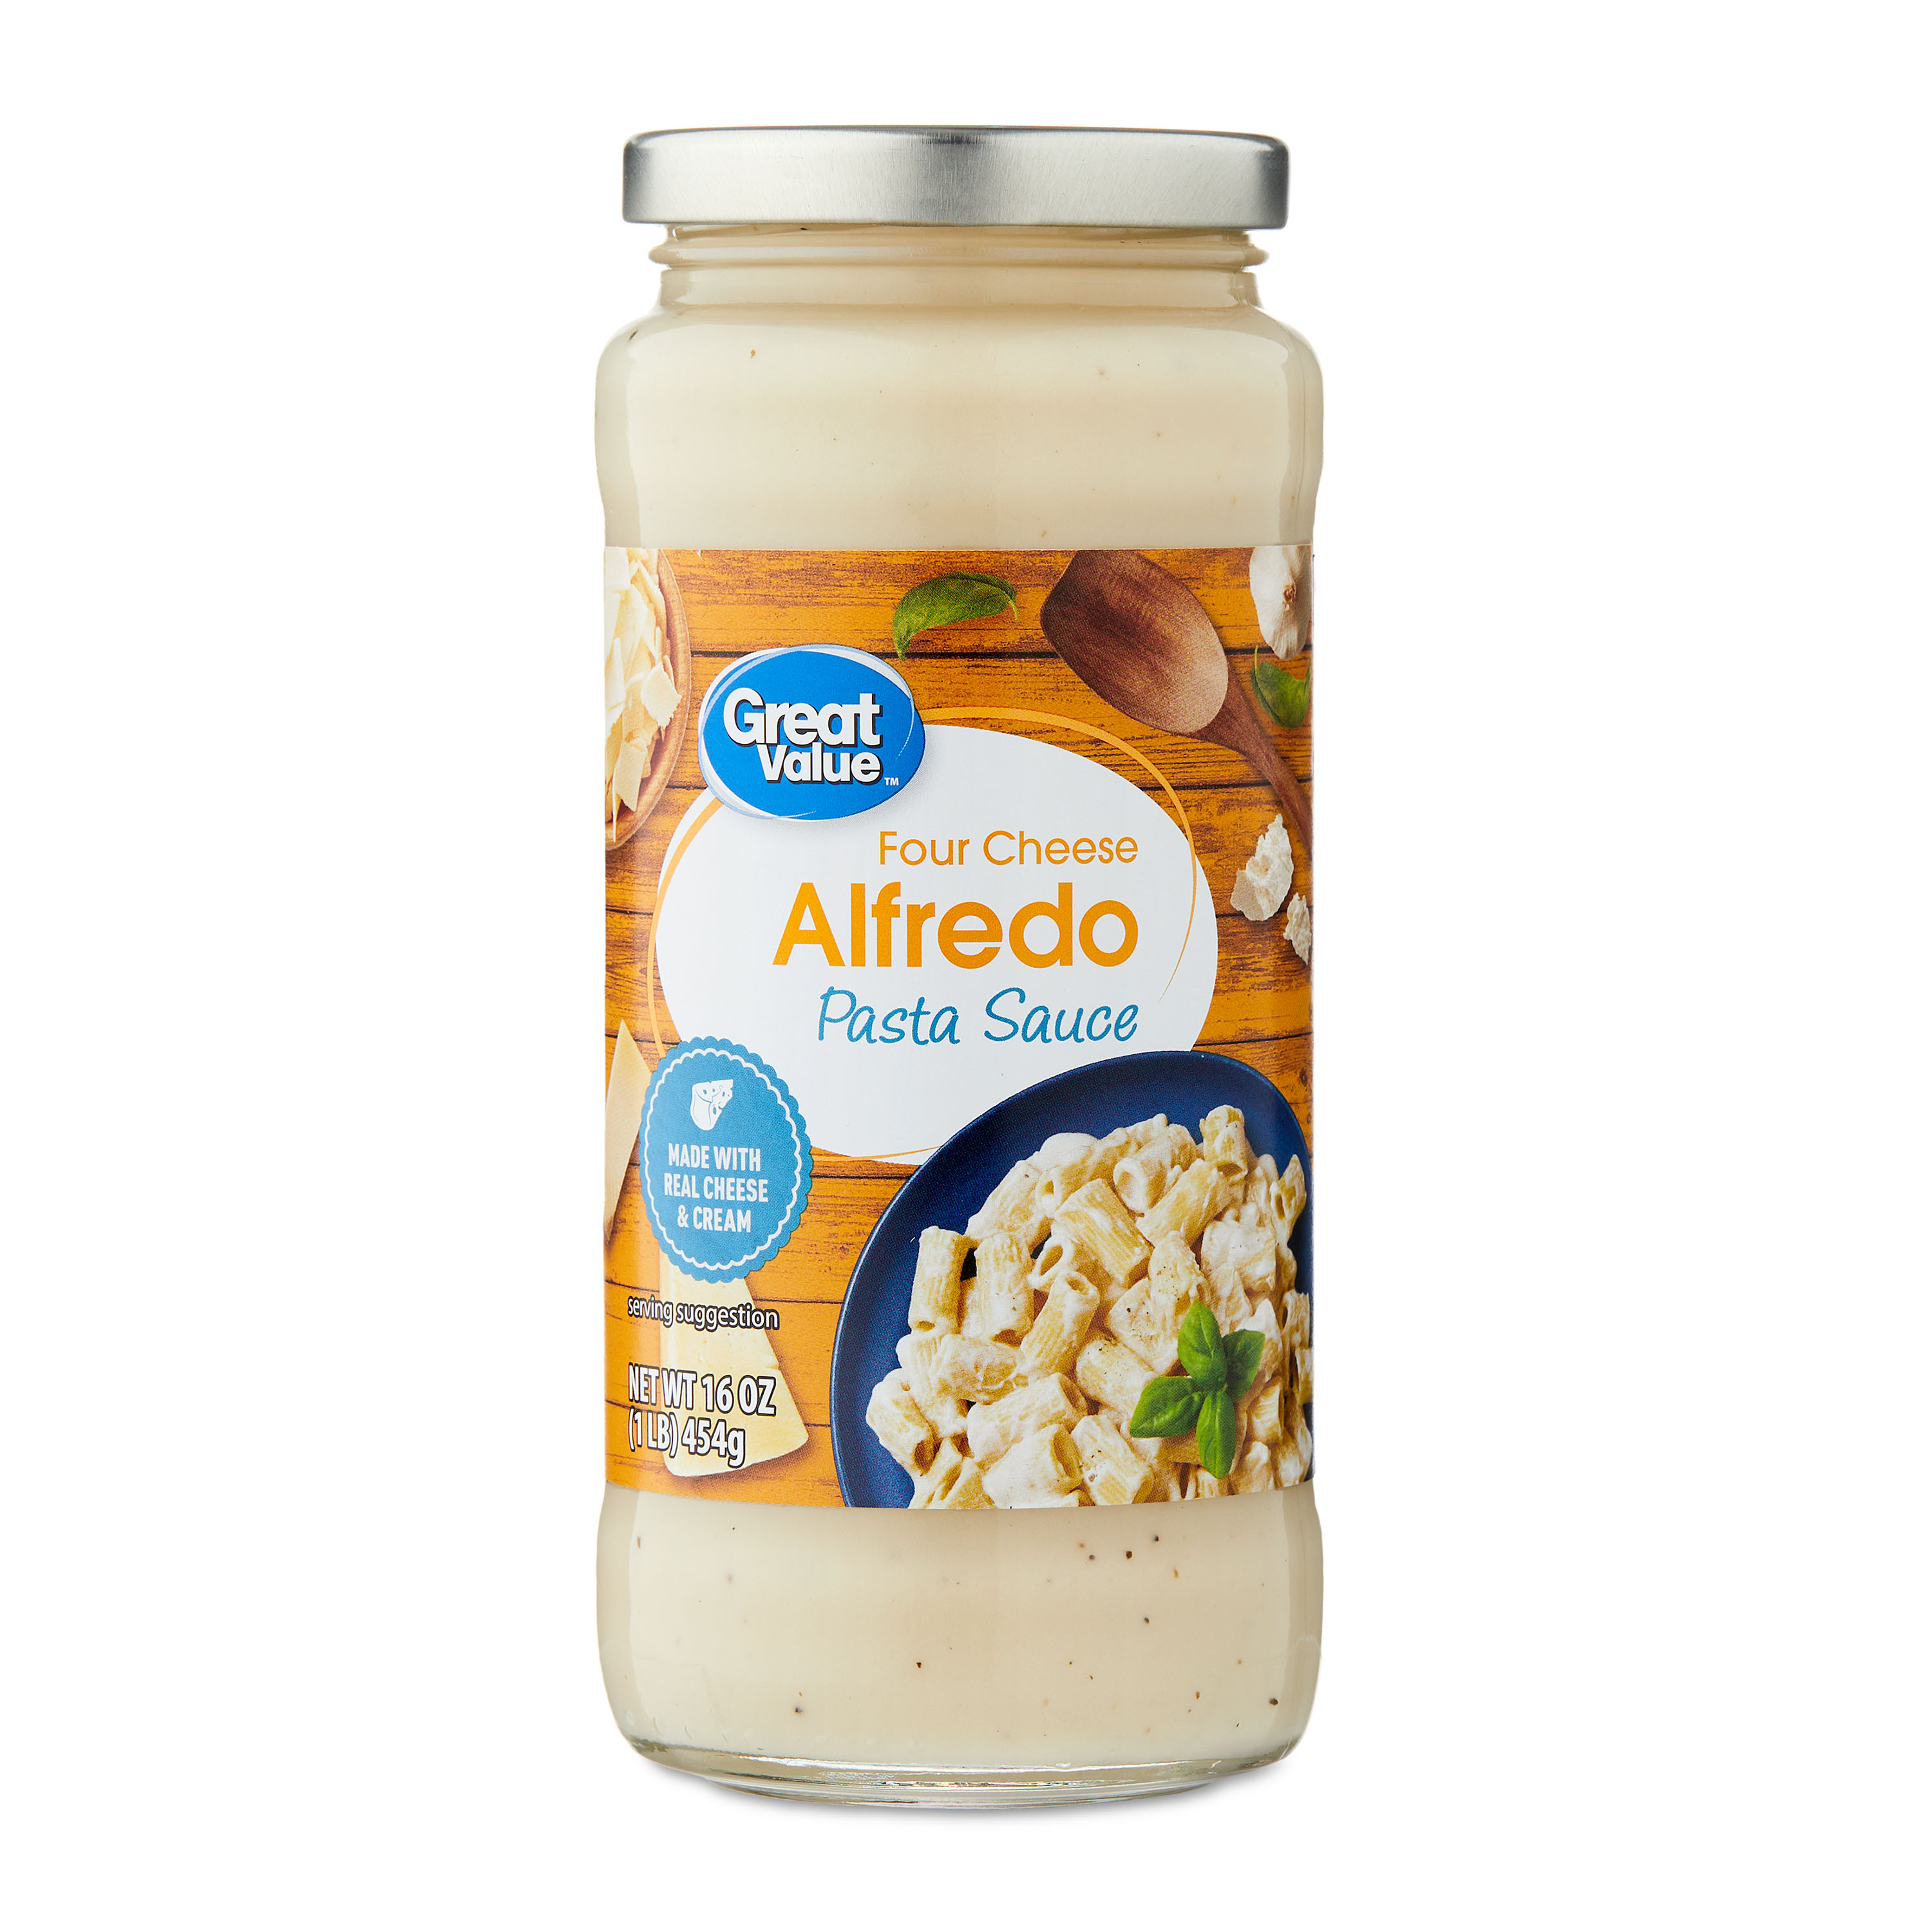 Great Value 4 Cheese Alfredo Pasta Sauce, 16 oz - image 1 of 8